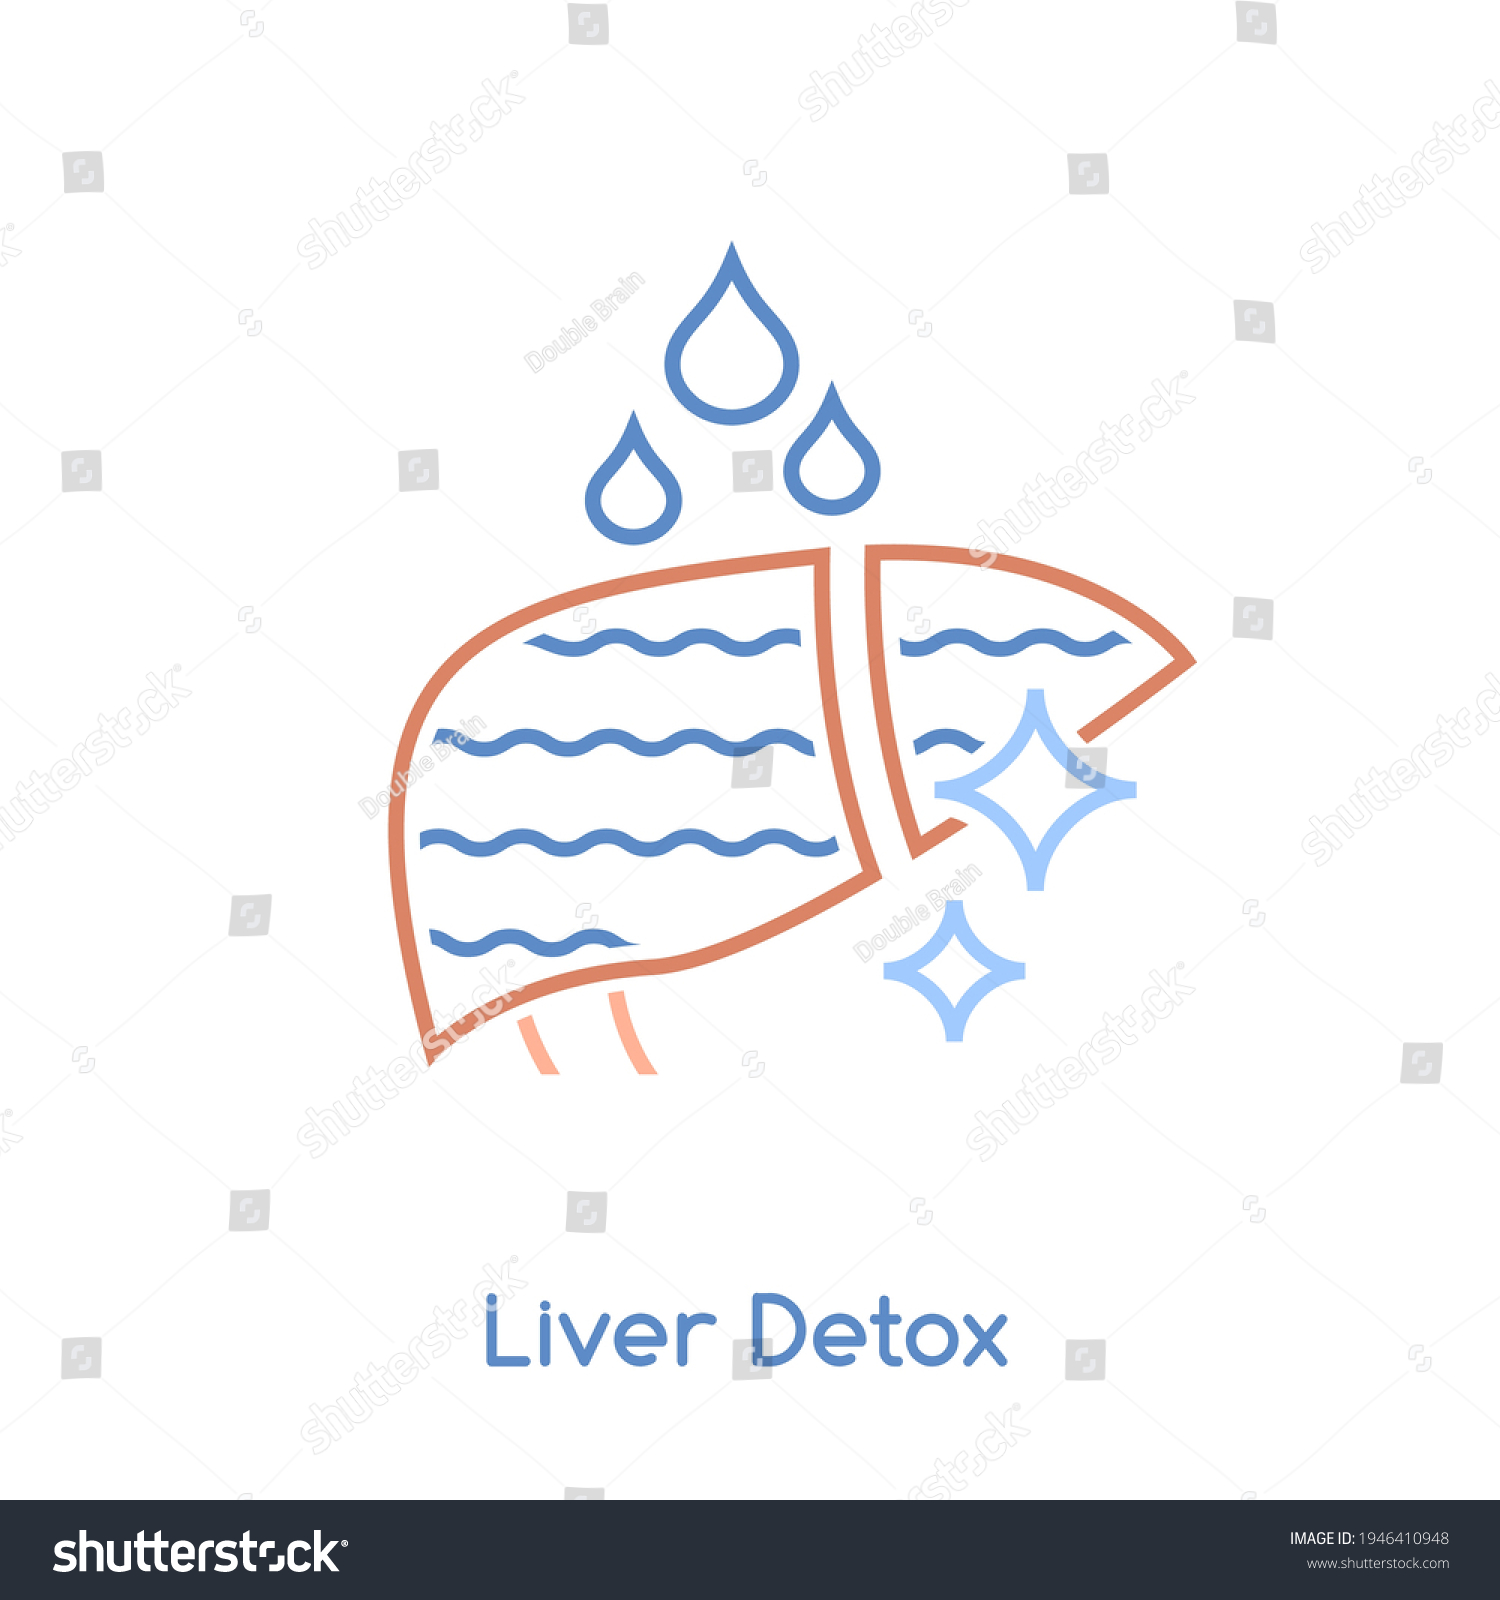 SVG of Liver detox icon. Linear medical pictogram. Detoxification sign. Stop hepatitis concept. Medical, scientific symbol. Healthcare graphic design. Vector illustration isolated on a white background. svg